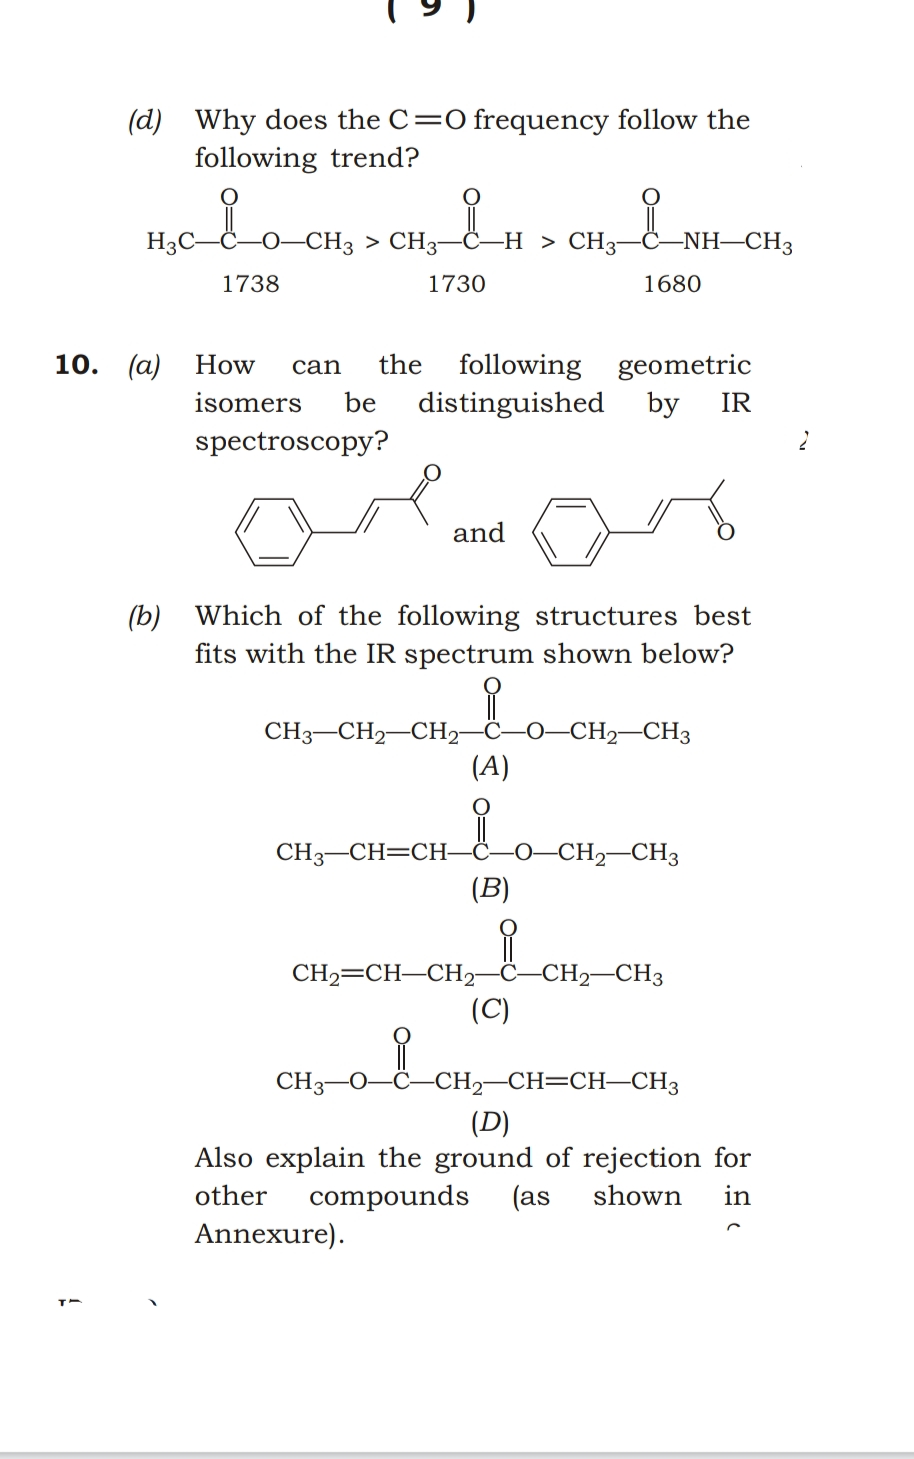 H3C-C-0-CH3 > CH3–C-
(d) Why does the C=0 frequency follow the
following trend?
-H > CH3-
-NH–CH3
>
1738
1730
1680
10. (а)
the
following geometric
distinguished
by
How
can
isomers
be
IR
spectroscopy?
and
(b) Which of the following structures best
fits with the IR spectrum shown below?
CH,–CH,–CH; _o-CH CH.
-0–CH2–CH3
(A)
CH3-CH=CH-
(B)
-CH2–CH3
ċ–CH2–CH3
CH2=CH-CH2
(C)
CH3-0
-CH2-CH=CH–CH3
(D)
Also explain the ground of rejection for
(as
other
compounds
shown
in
Annexure).
